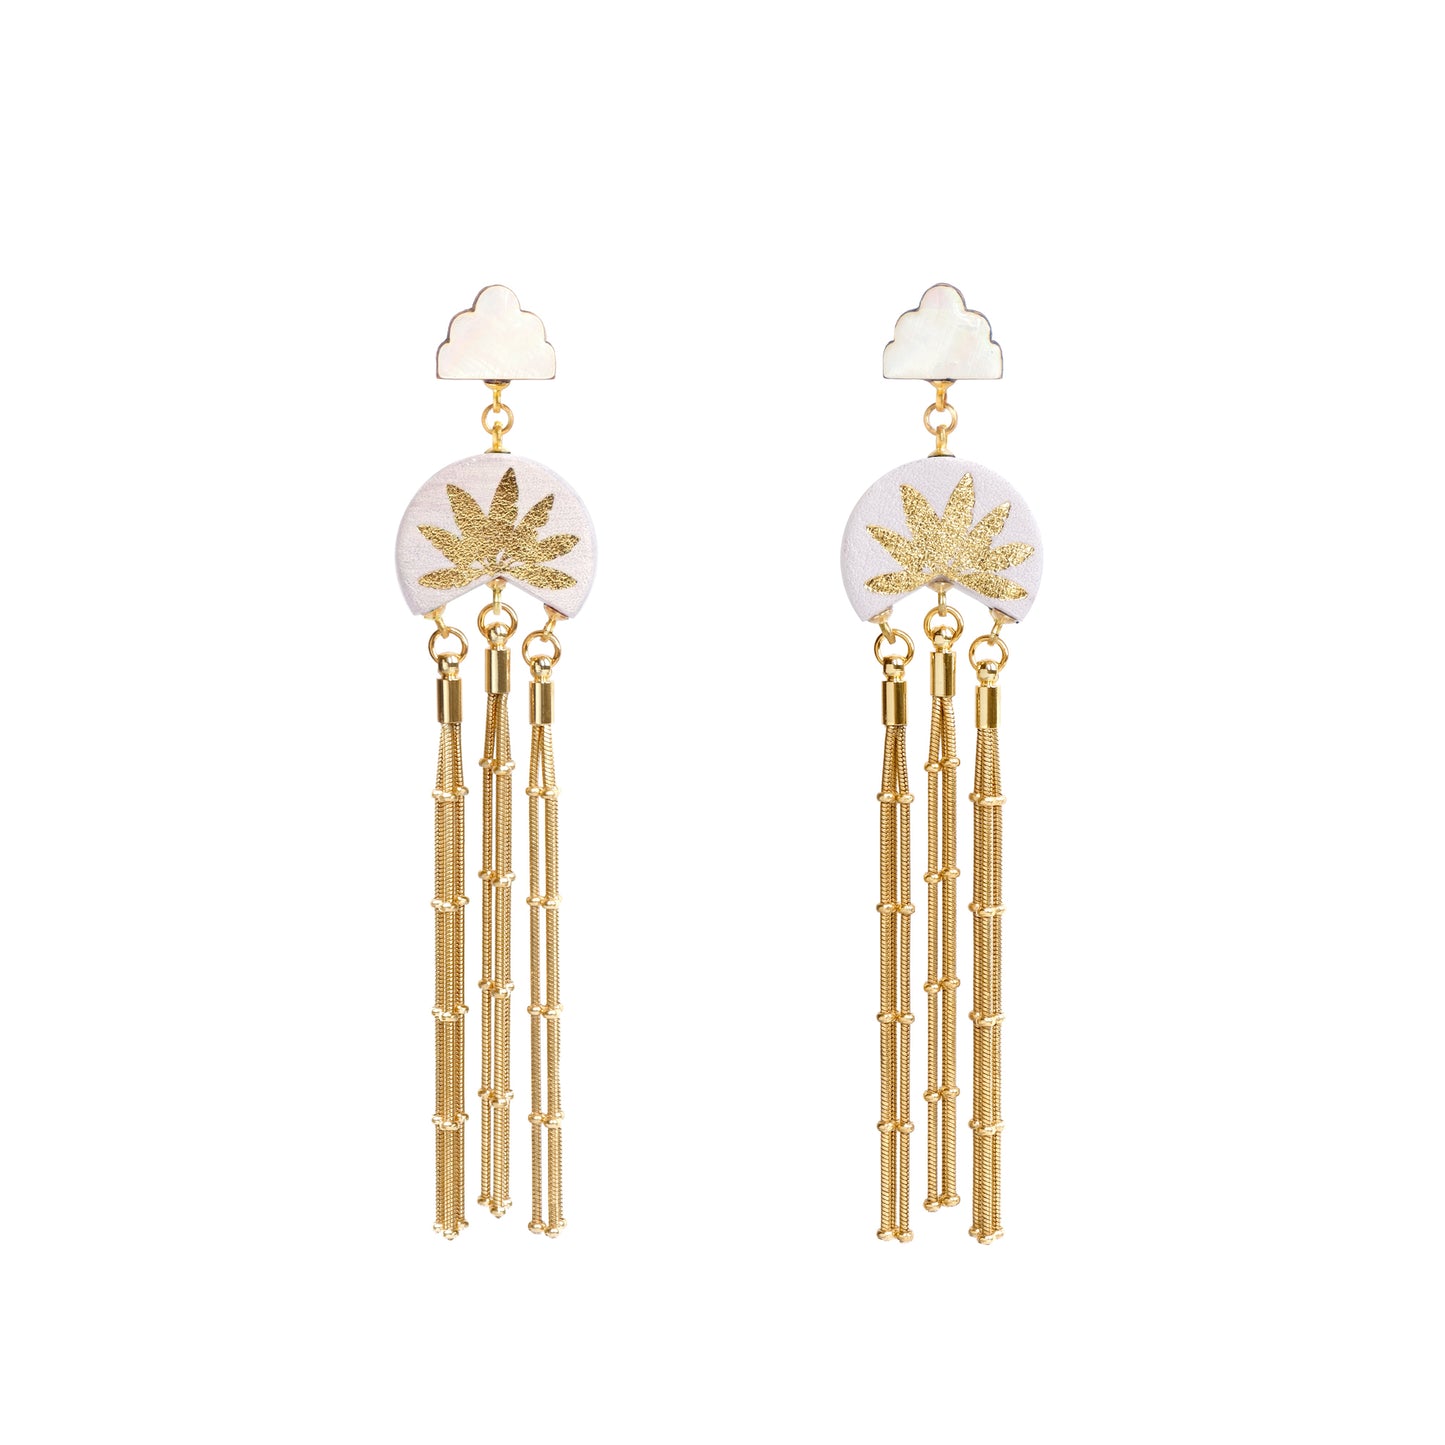 lilac leather medallion earrings, with gold palm tree print, gold tassels & mother of pearl cloud shade studs.